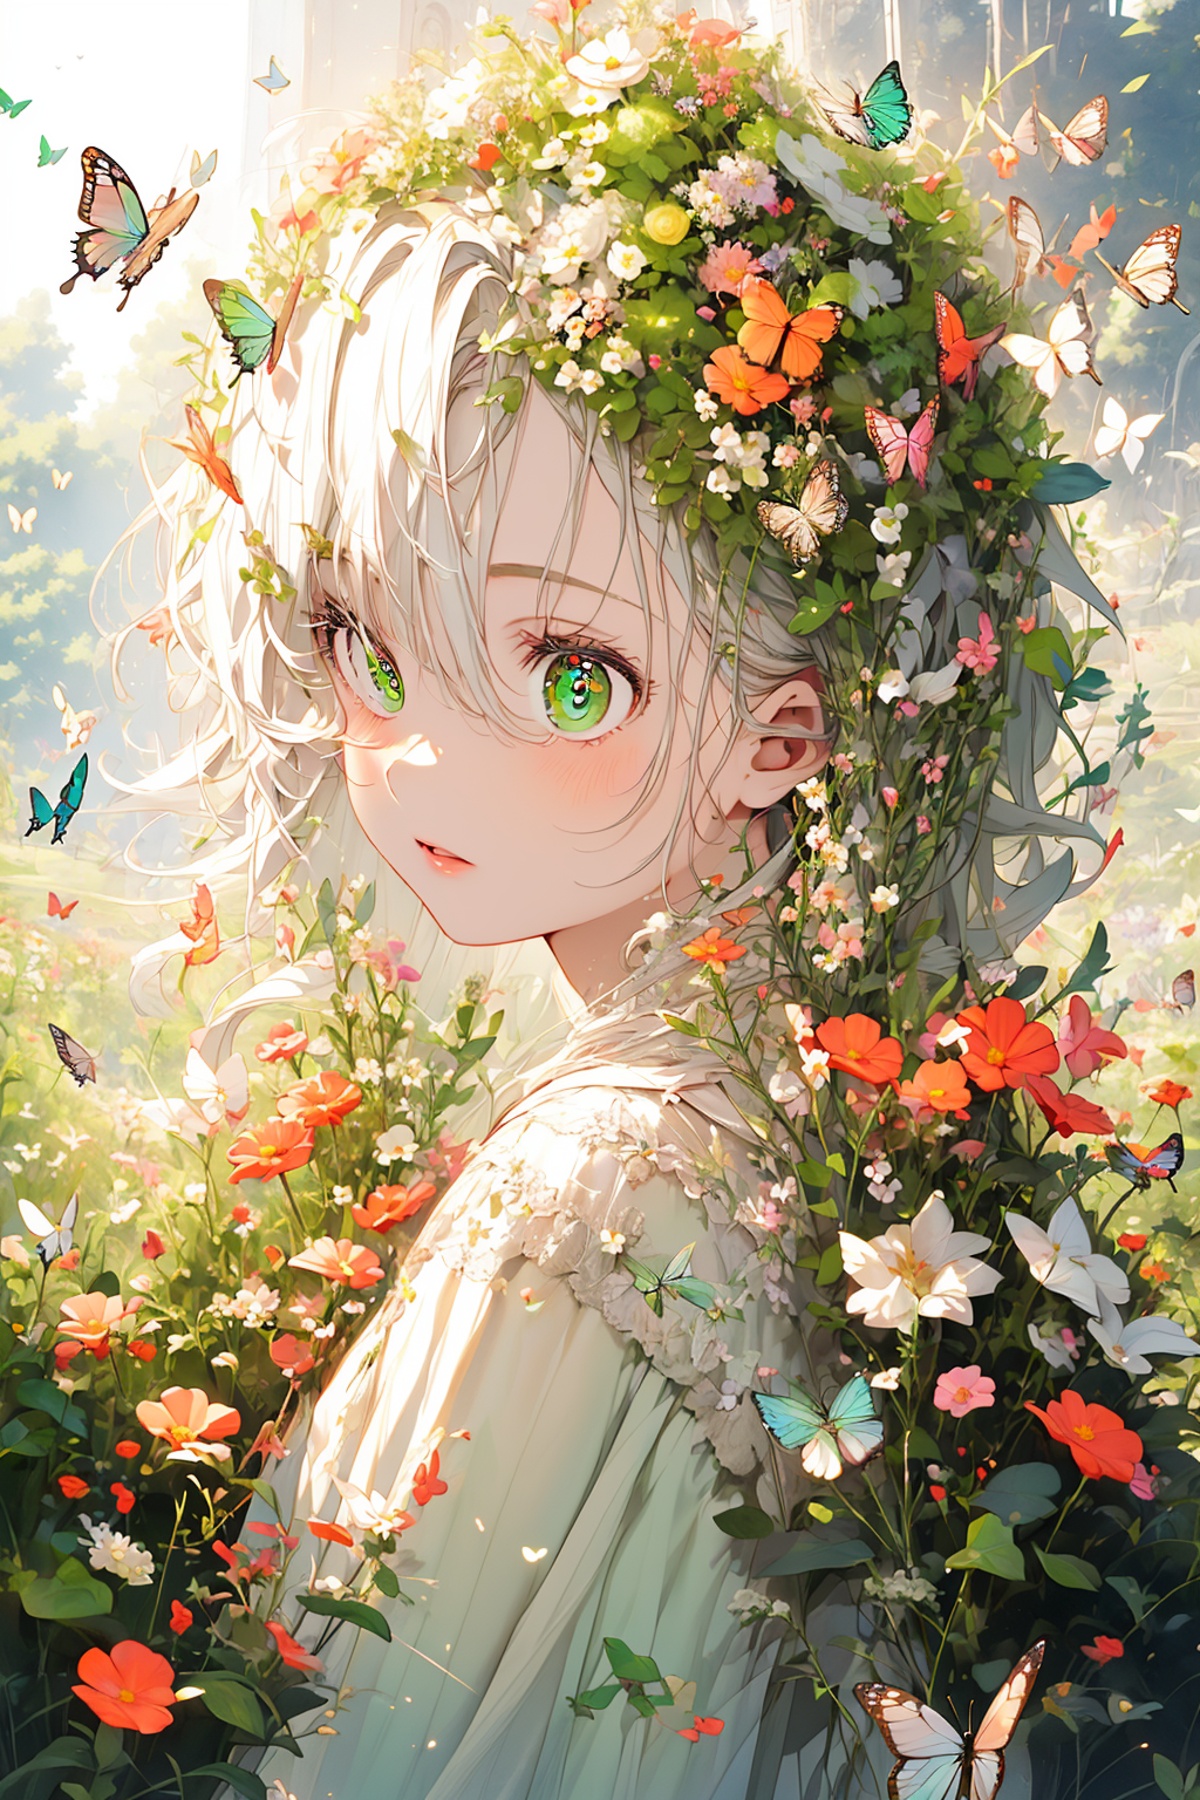 Illustration of a young girl with green eyes, surrounded by flowers and butterflies.